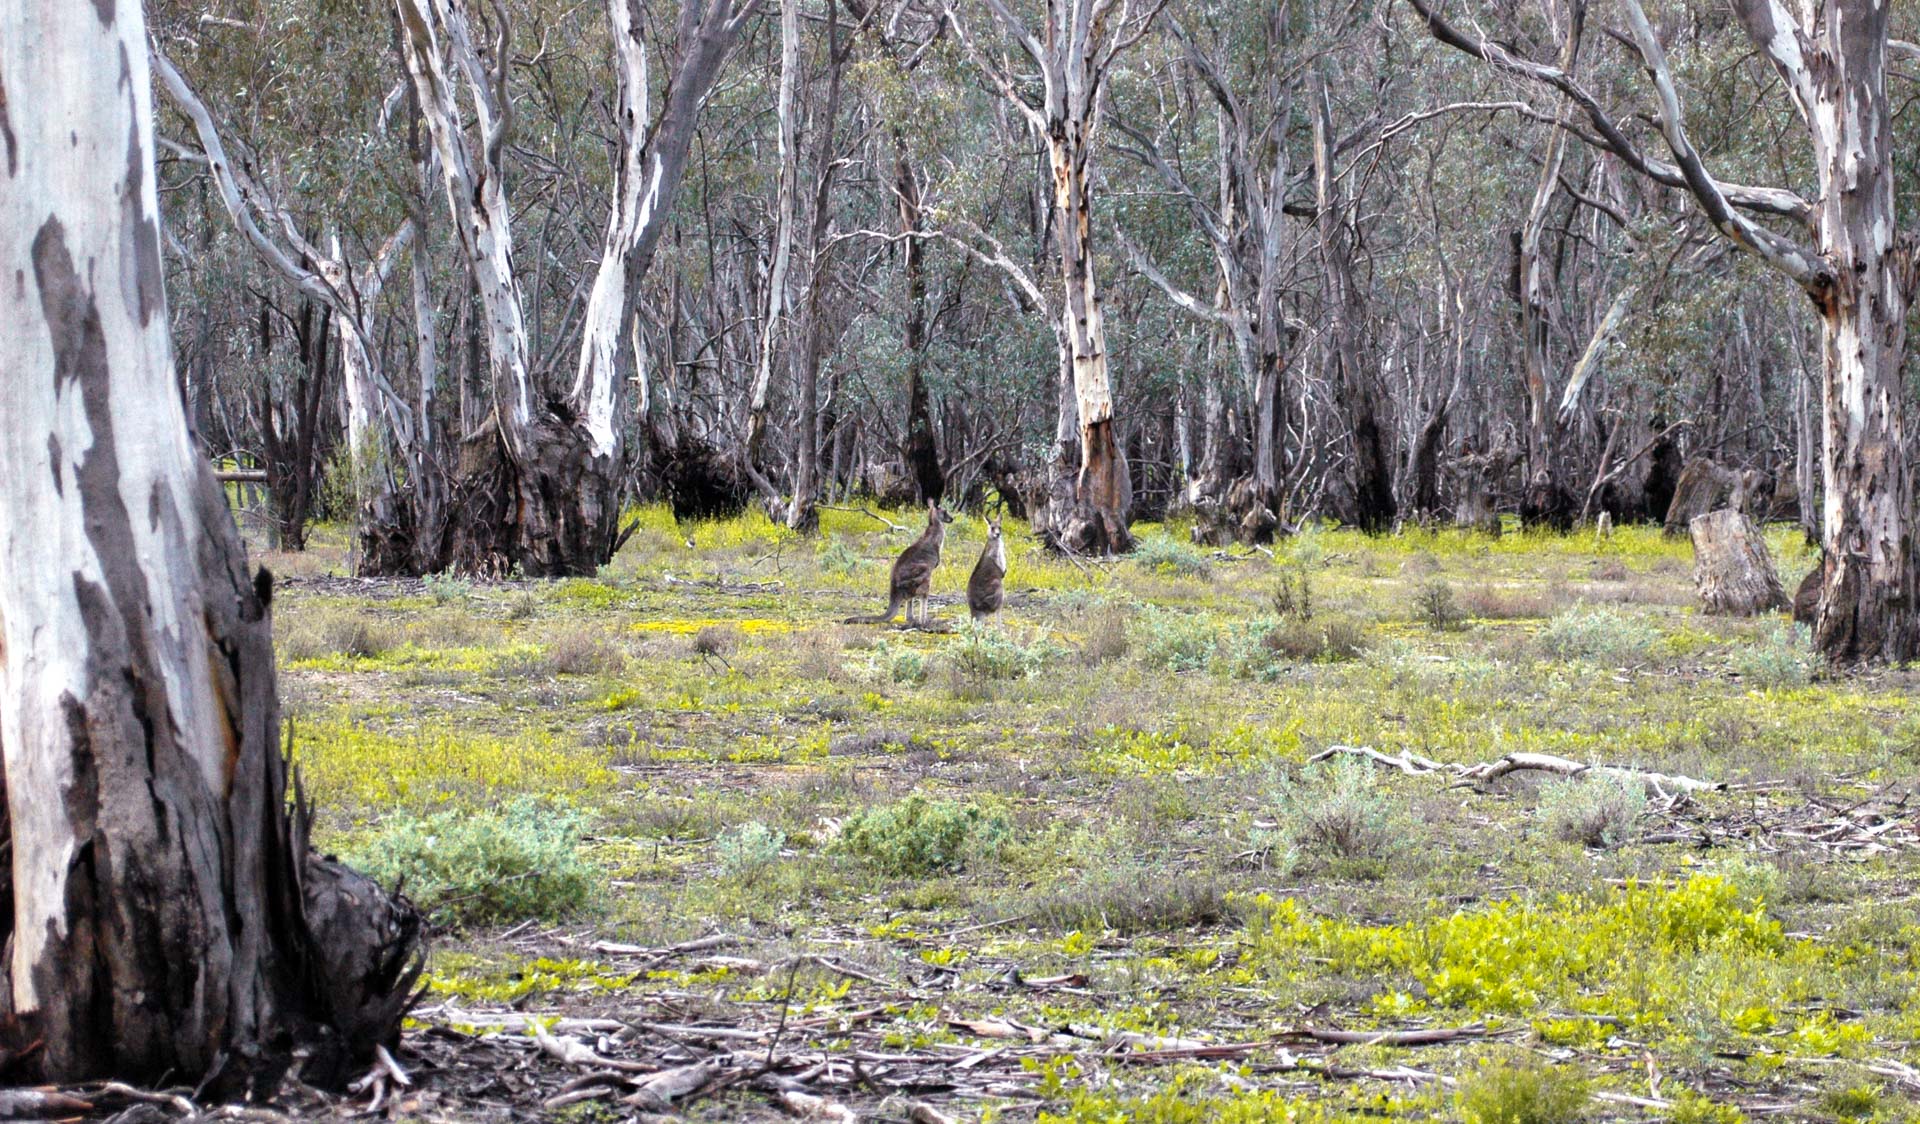 Two kangaroos graze in a clearing of trees